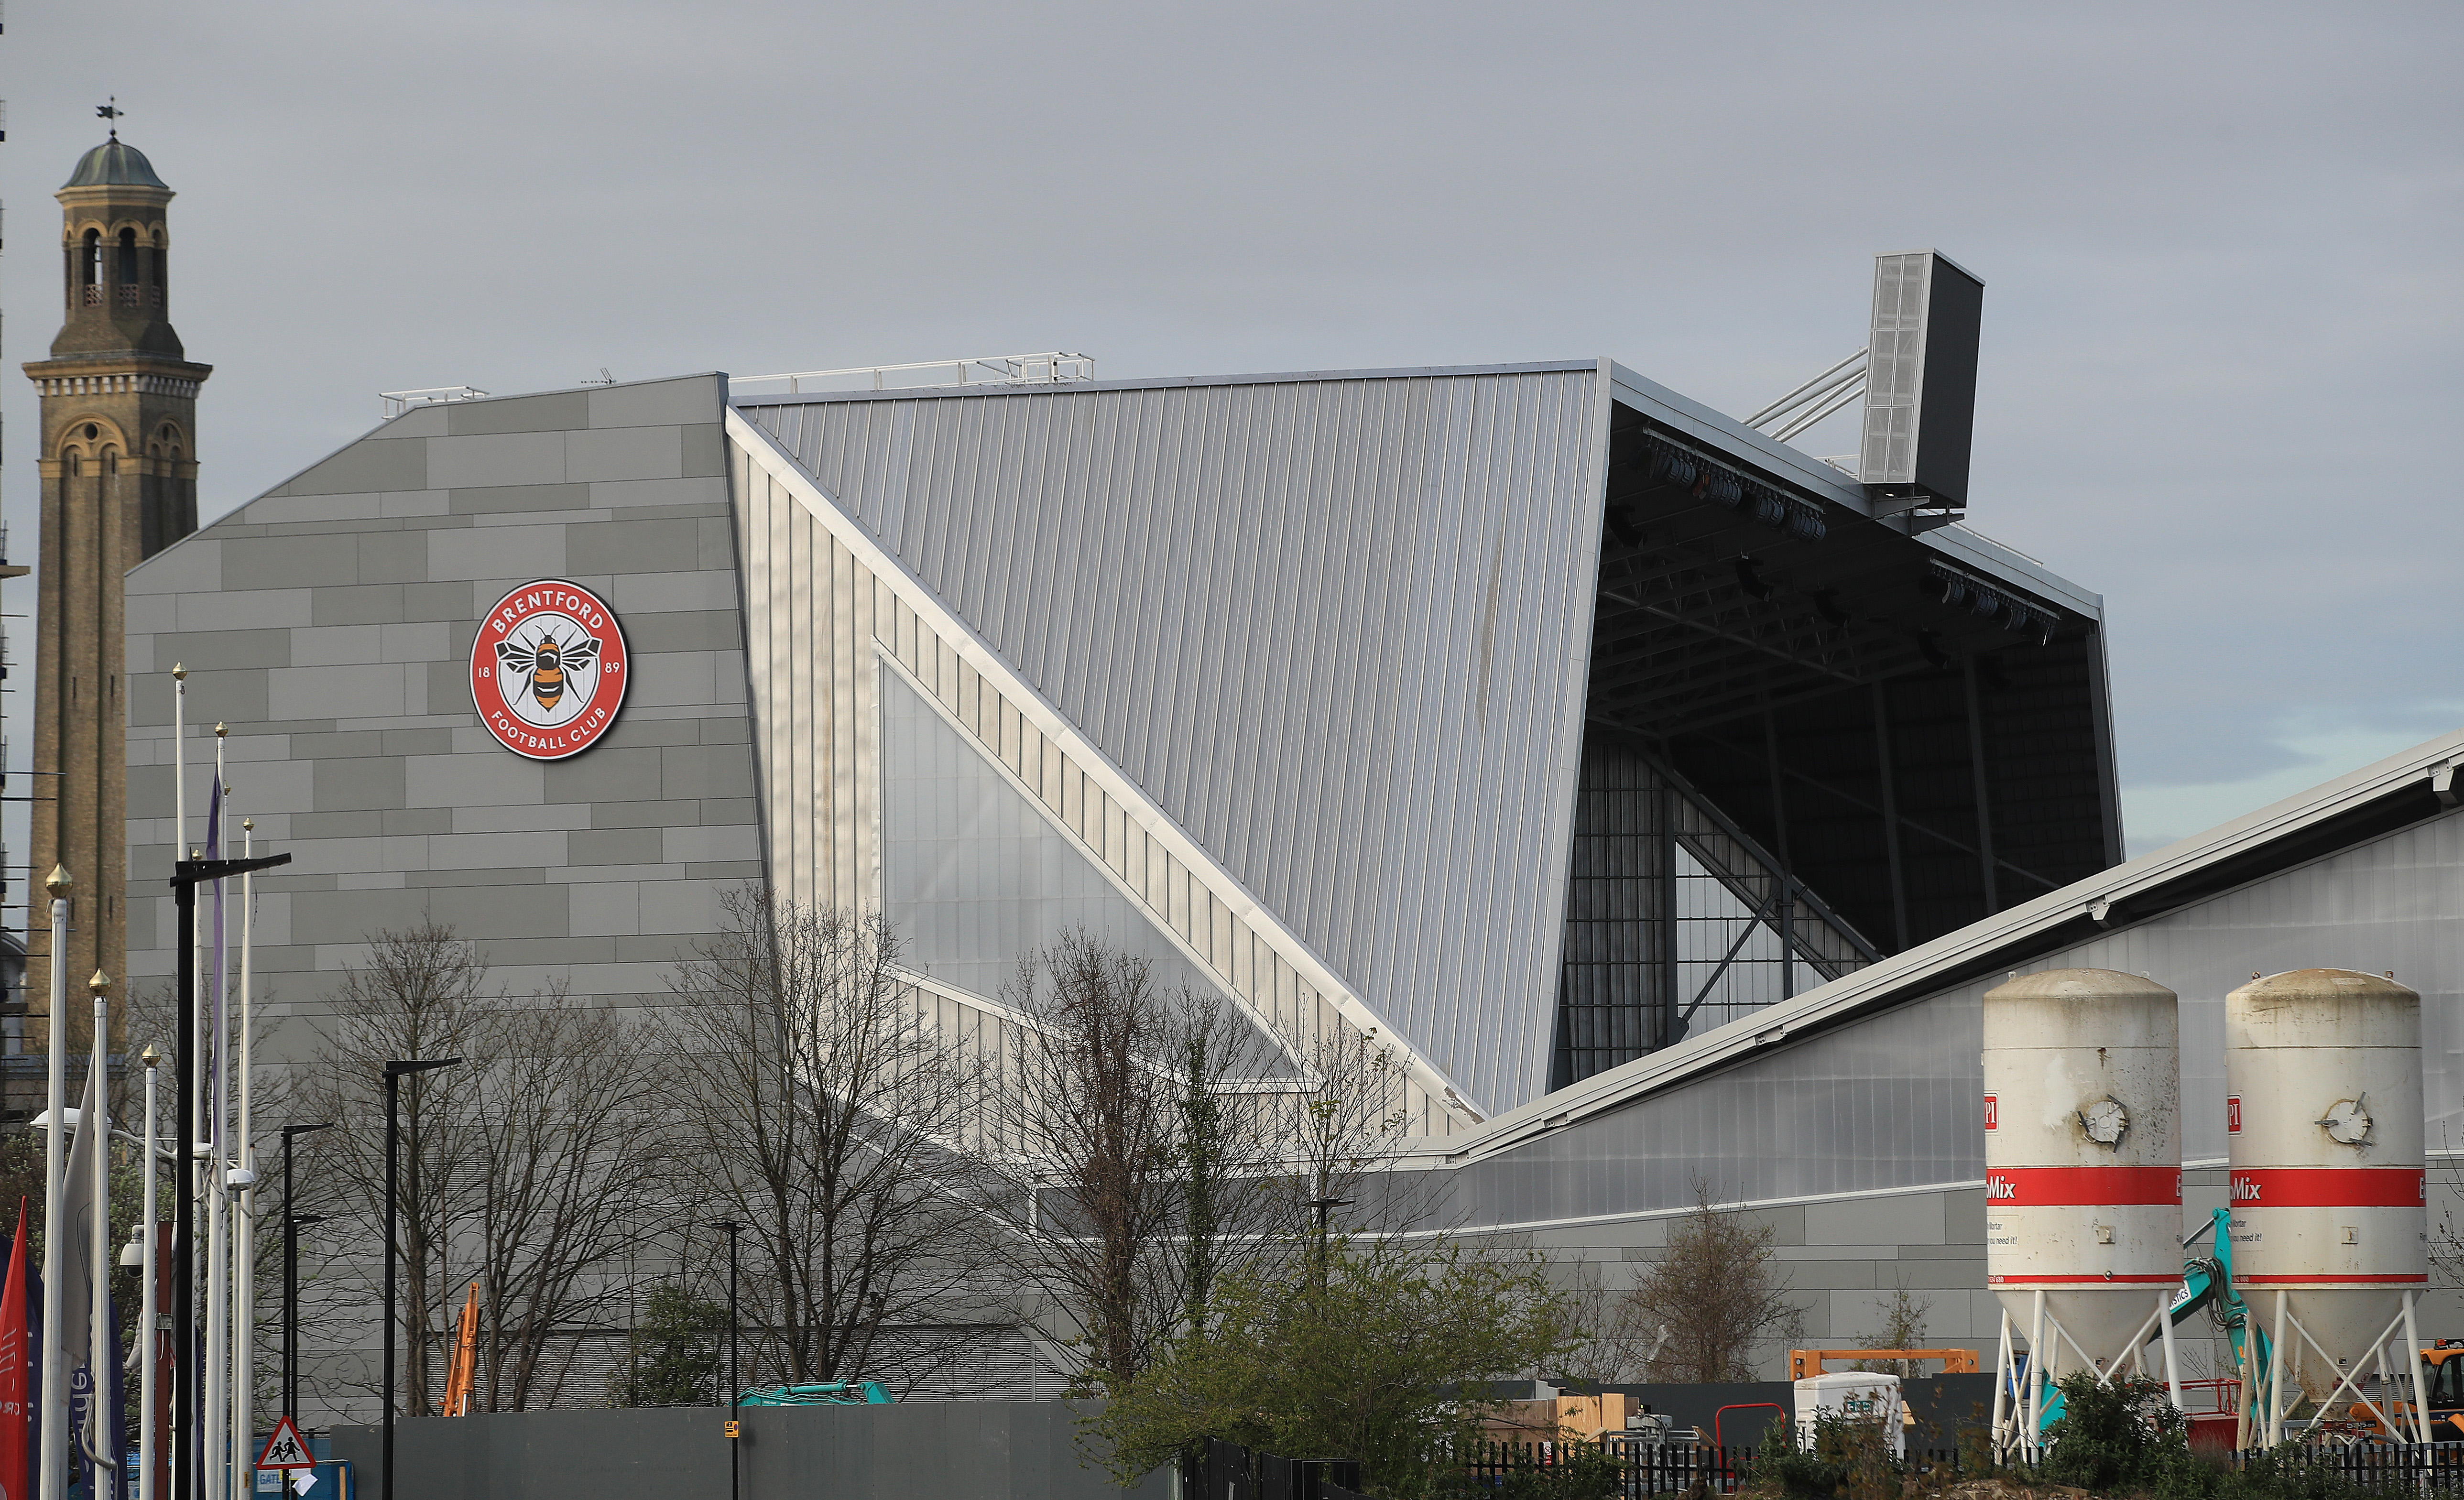 LONDON, ENGLAND  - APRIL 02: A general view of Brentford Community Stadium, the future home of Brentford Football Club, on April 2, 2020 in London, England. The Coronavirus (COVID-19) pandemic has spread to many countries across the world, claiming over 40,000 lives and infecting hundreds of thousands more. (Photo by Andrew Redington/Getty Images)